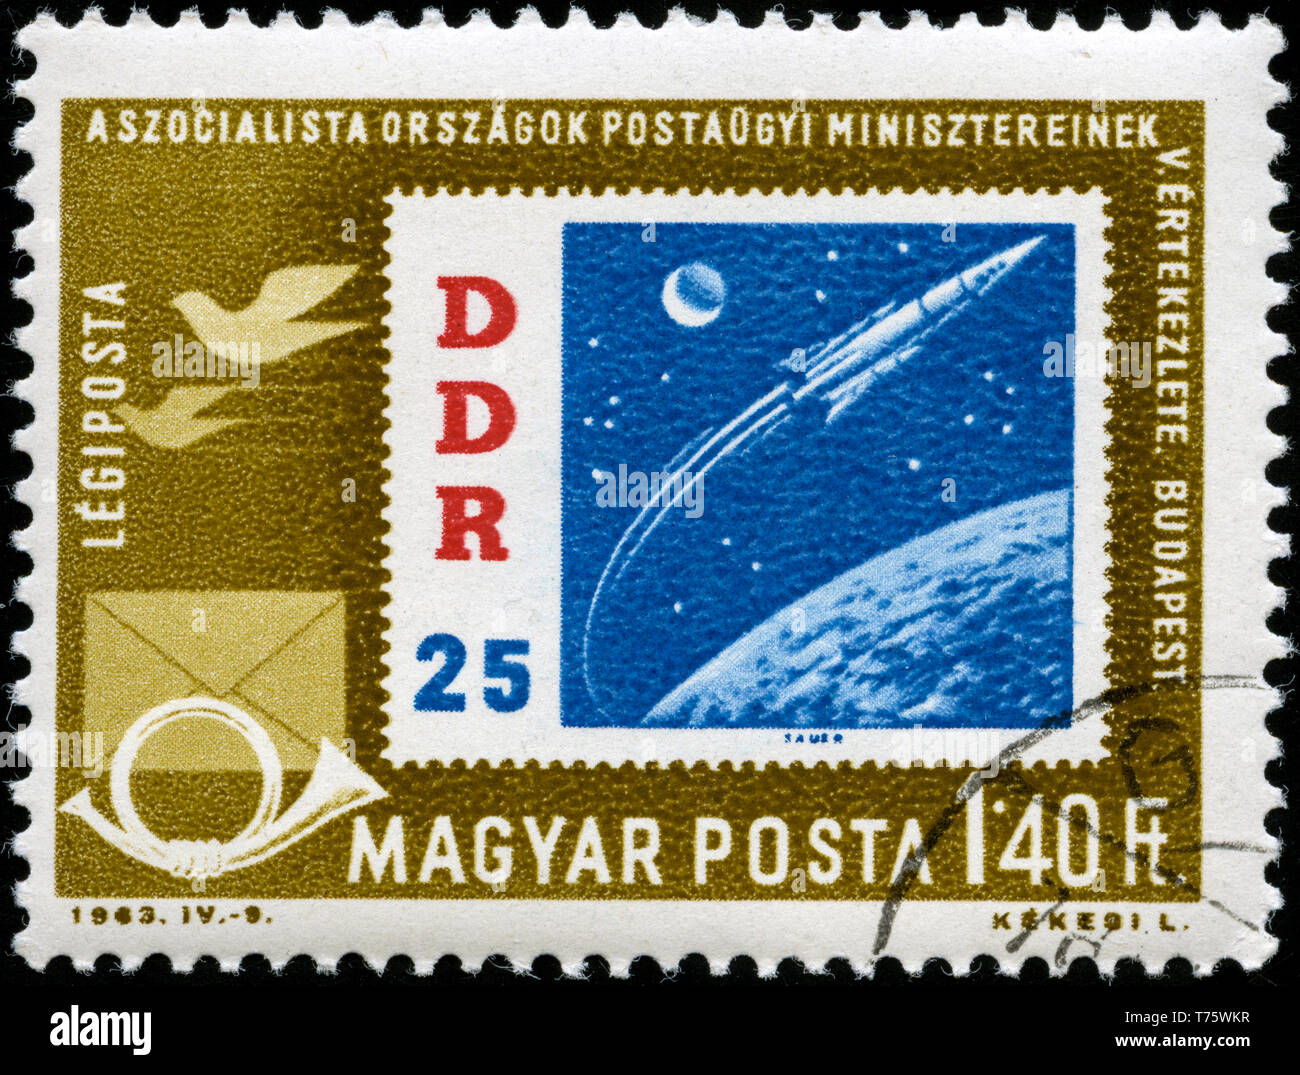 Postage stamp from Hungary in the Conf. of Postal Ministers of Communist Countries series issued in 1963 Stock Photo